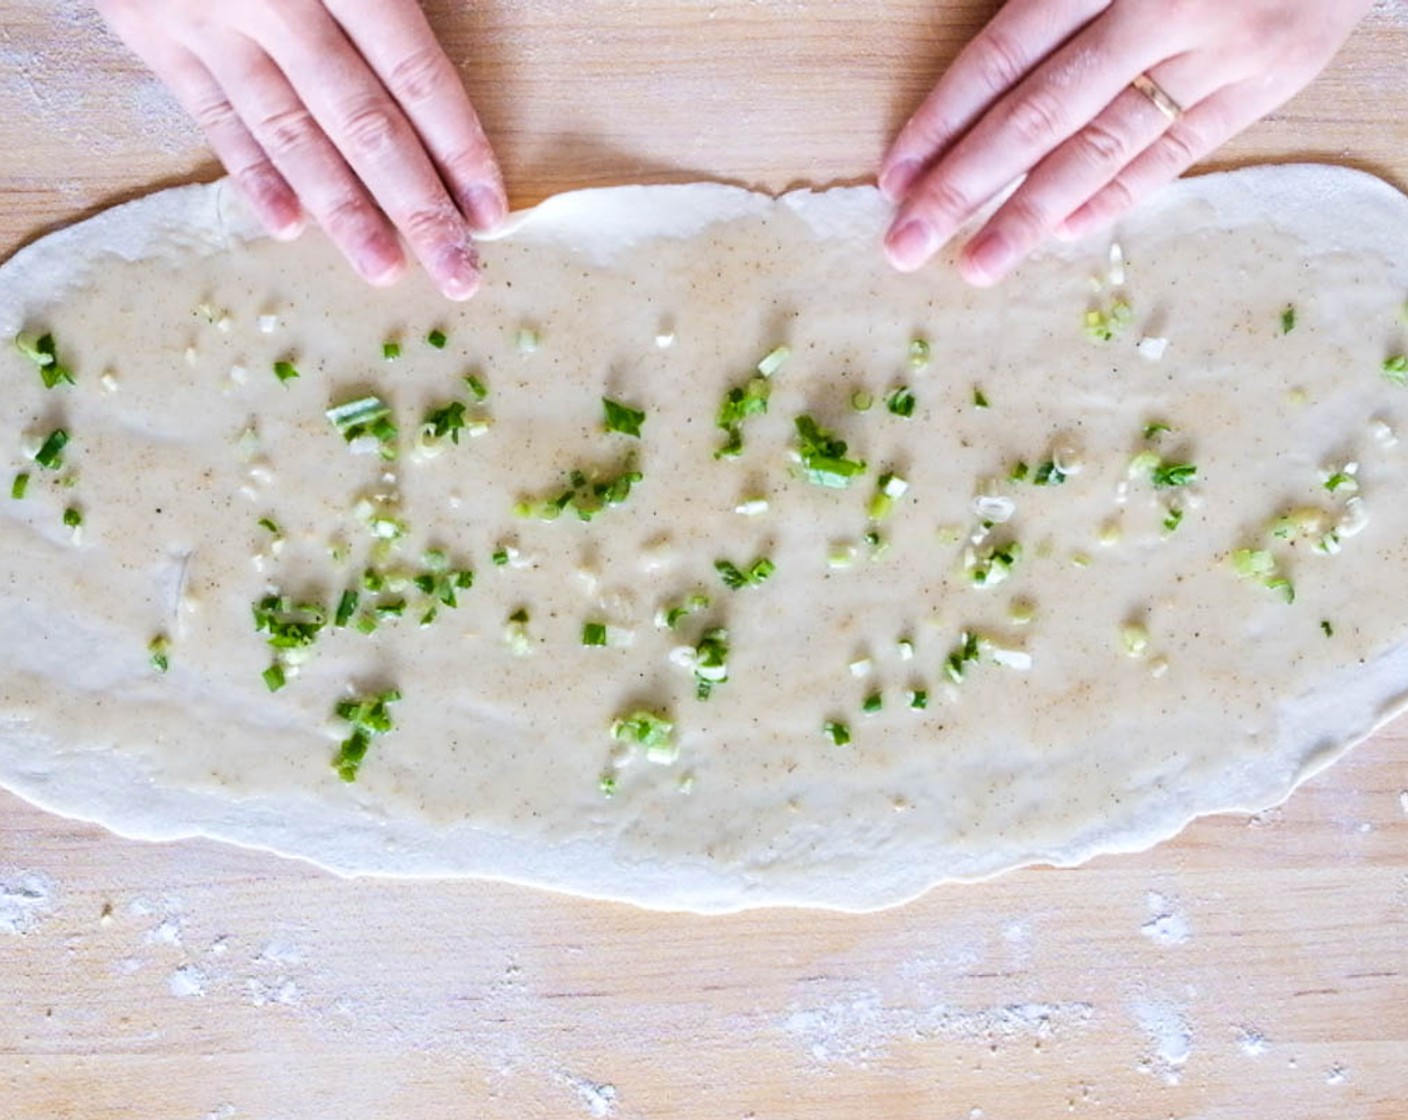 step 7 Use a flat rolling pin to roll the ball out into a strip, as thin as you can without tearing the dough, about 45cm (18-inch) long. Smear one-sixth of the paste on top of the strip and sprinkle one-sixth of the green onions all the way down the strip.